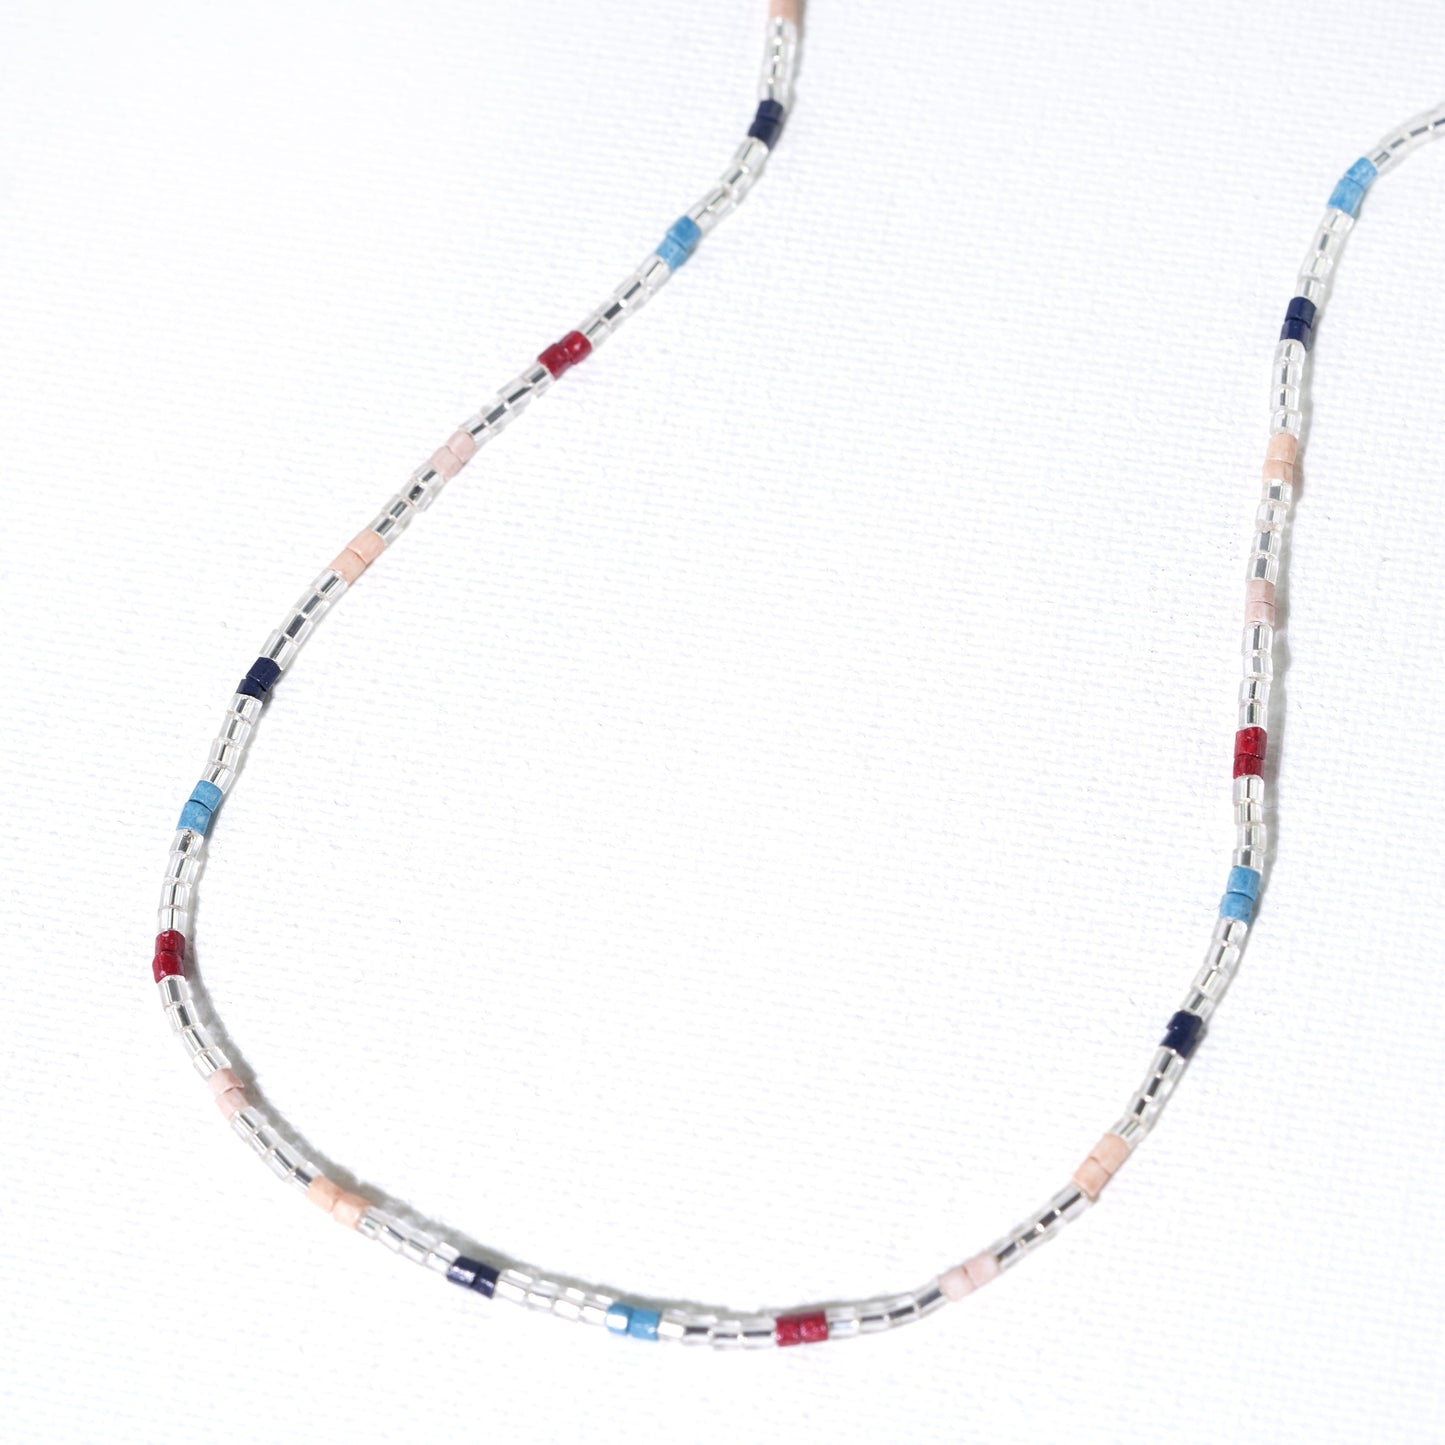 Jianhui London Colorblocked The Next Pashmina Beaded Necklace, Red /Turquoise/White - Statement Boutique